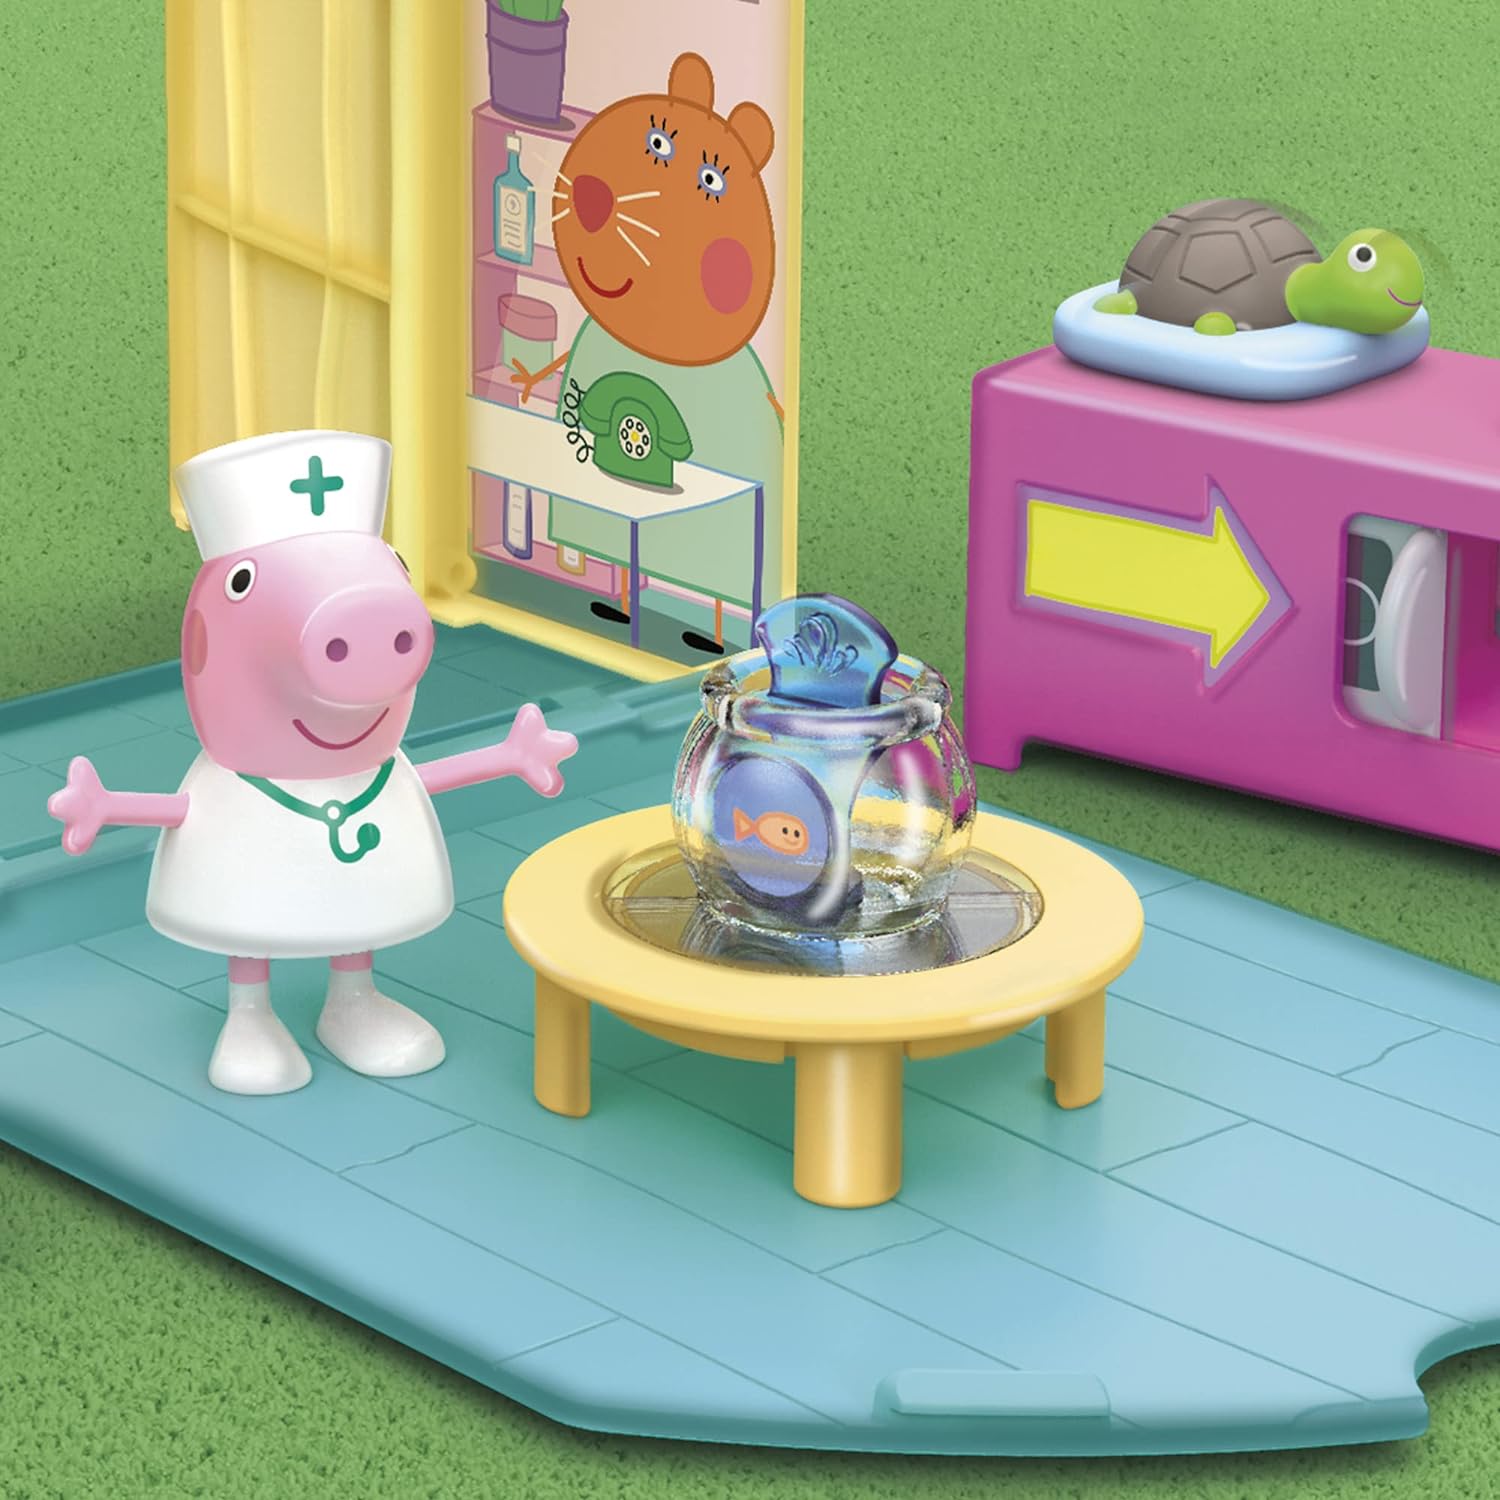 Hasbro Peppa Pig Peppa’s Adventures Peppa Visits The Vet Playset Preschool Toy, 1 Figure and 3 Accessories, Ages 3 and Up Multi…